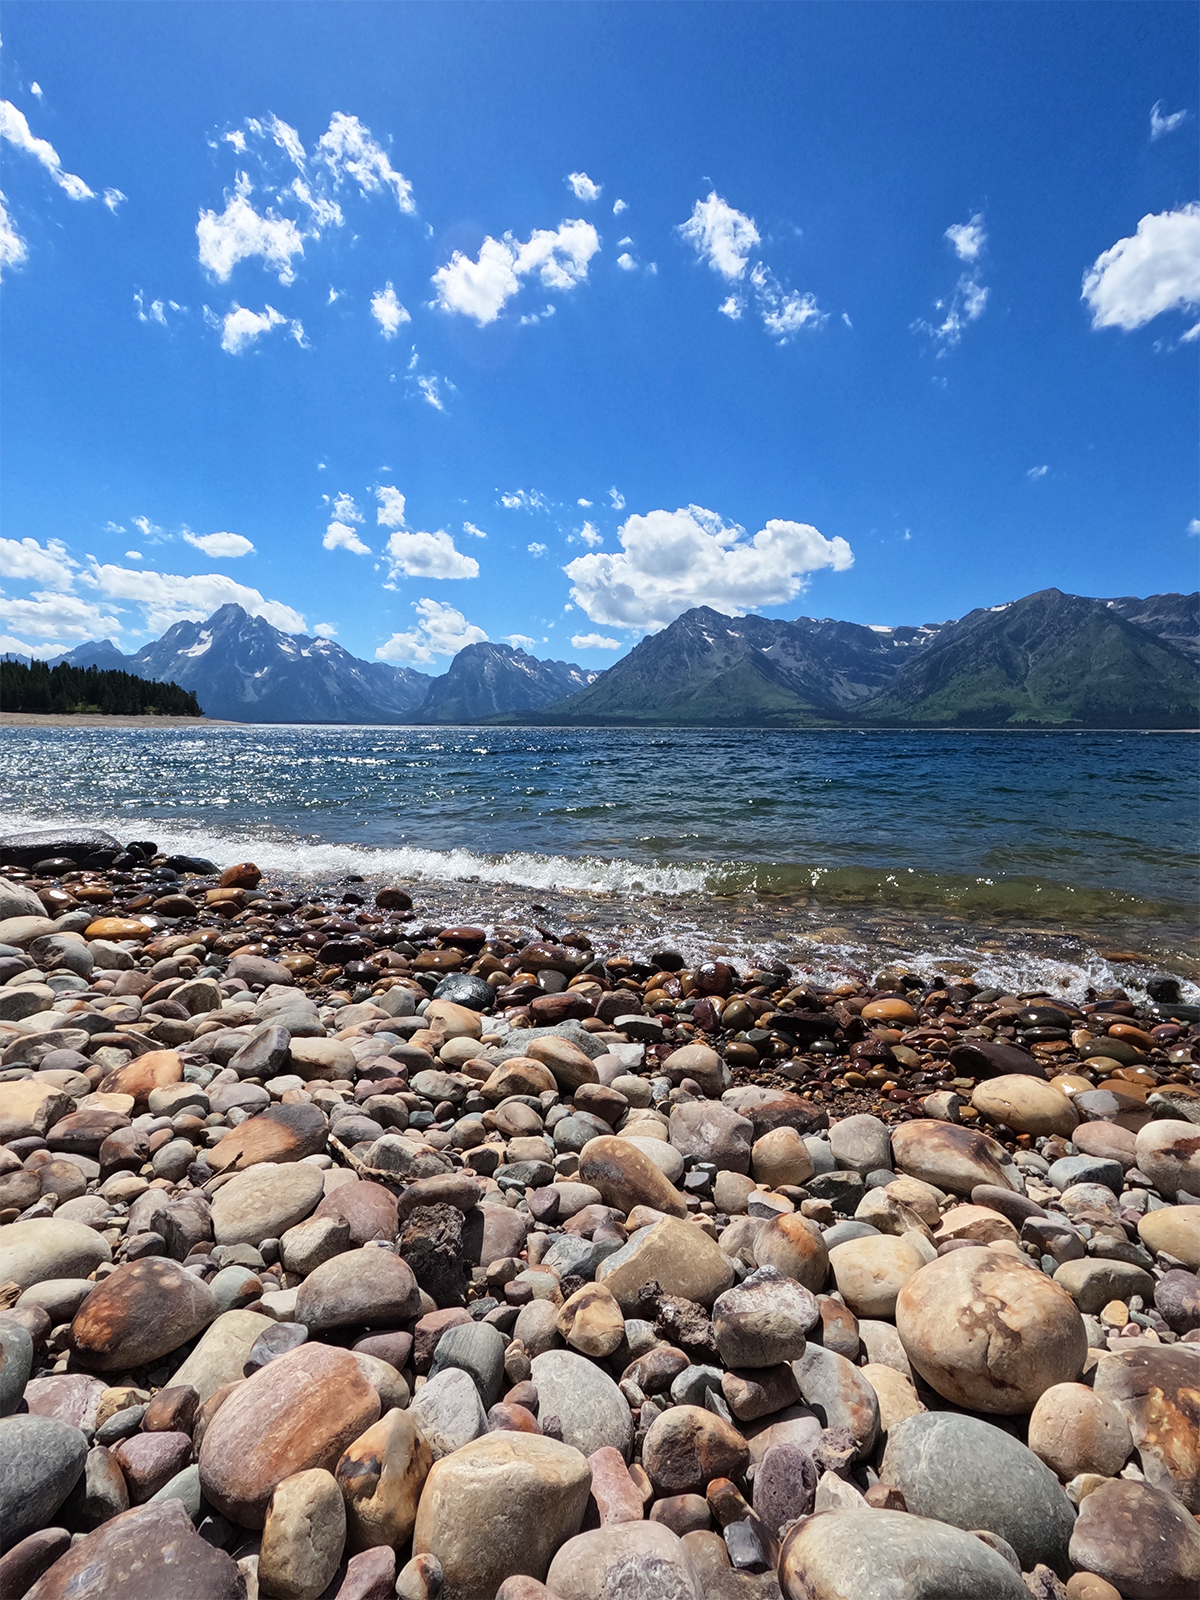 must see in grand teton national park view of colter bay rocky shore lake and mountains in distance